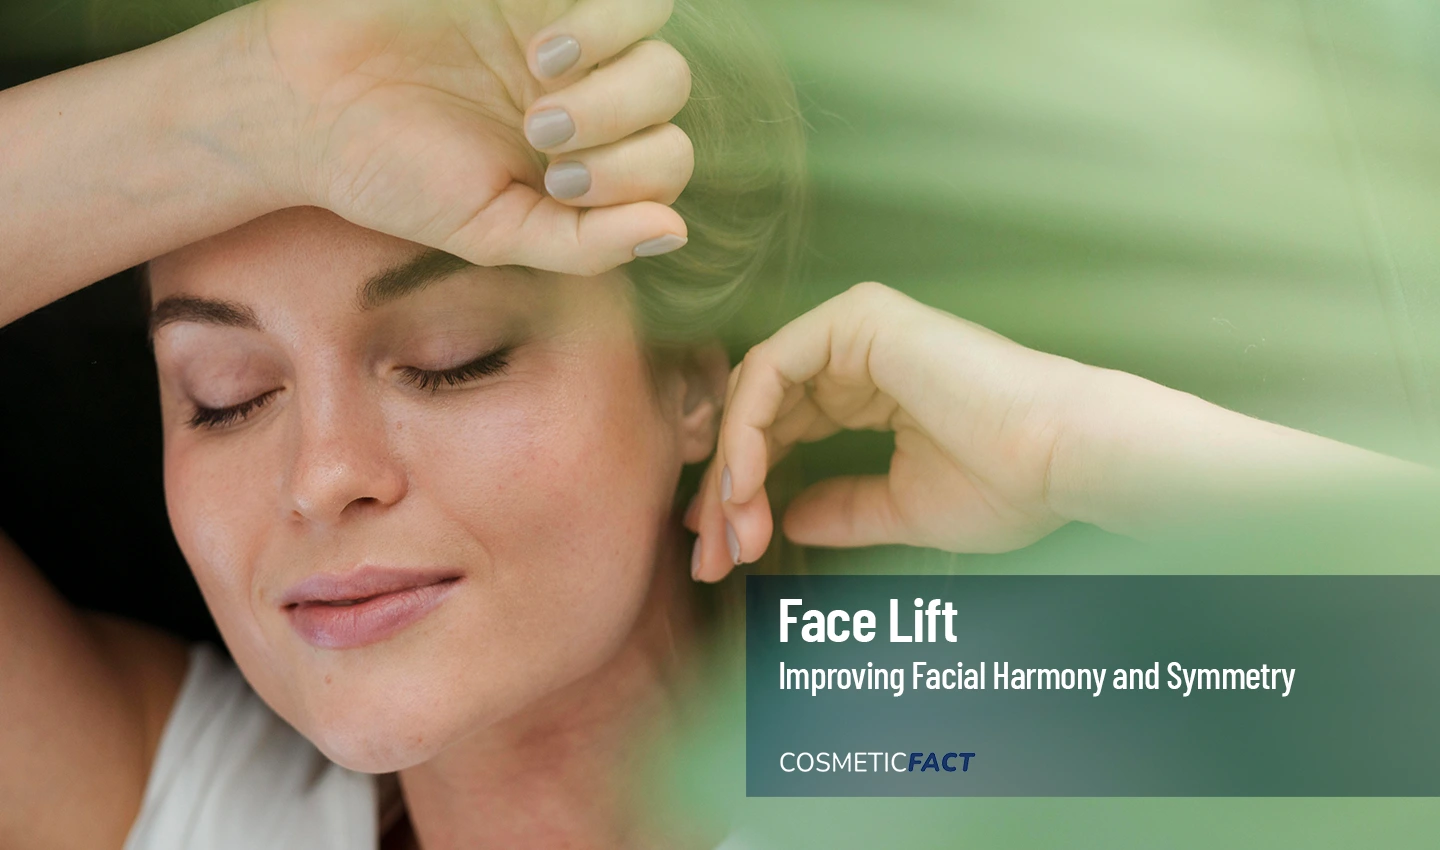 A satisfied woman after achieving facial harmony with facelift surgery, showing a more youthful and balanced appearance.